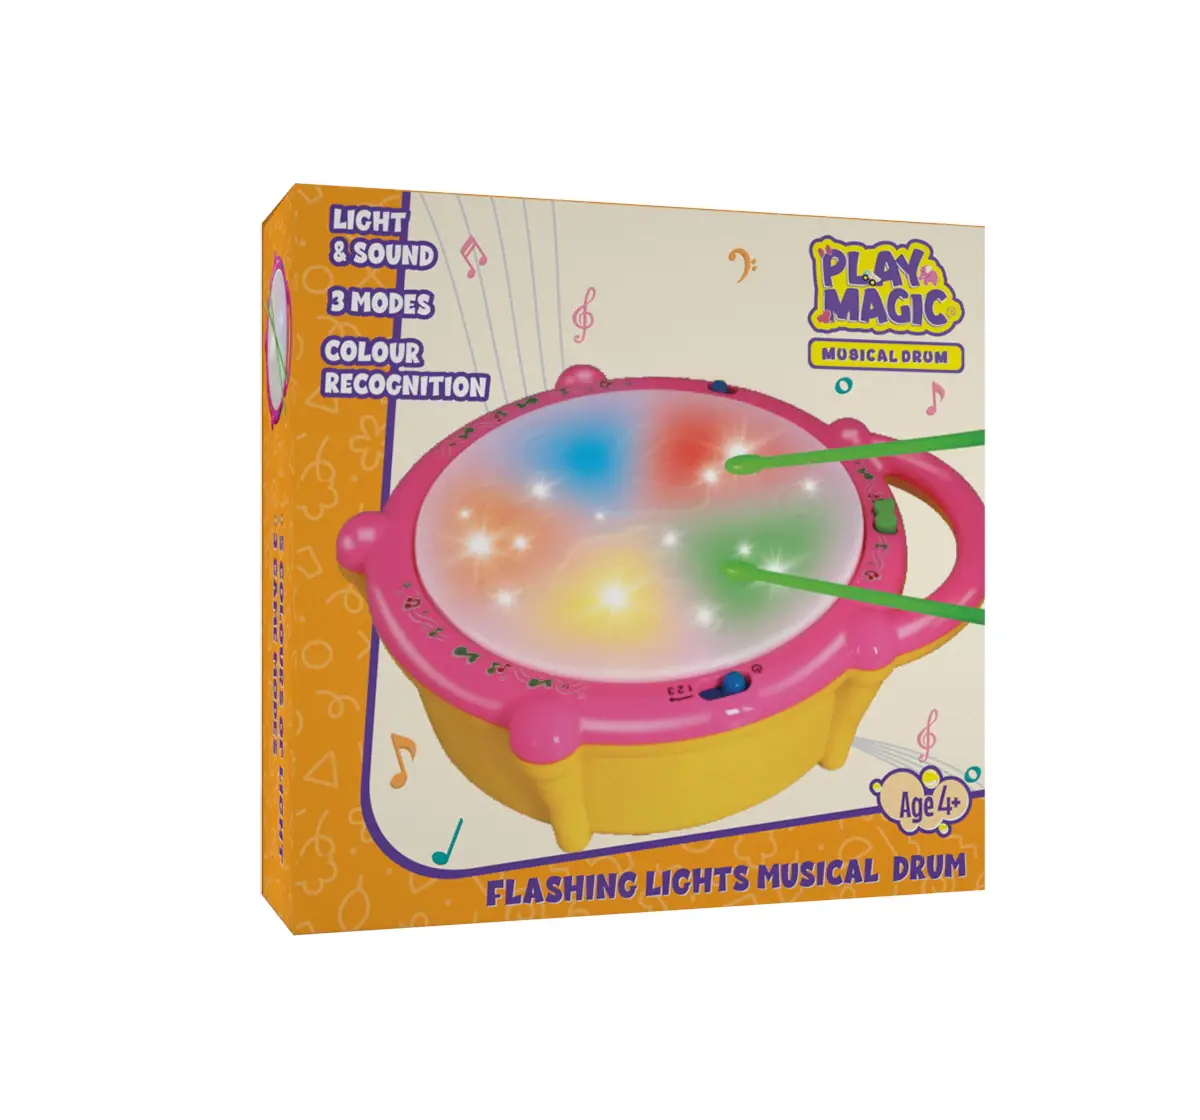 PlayMagic Flashing Lights Musical Drum For Kids of Age 3Y+, Multicolour